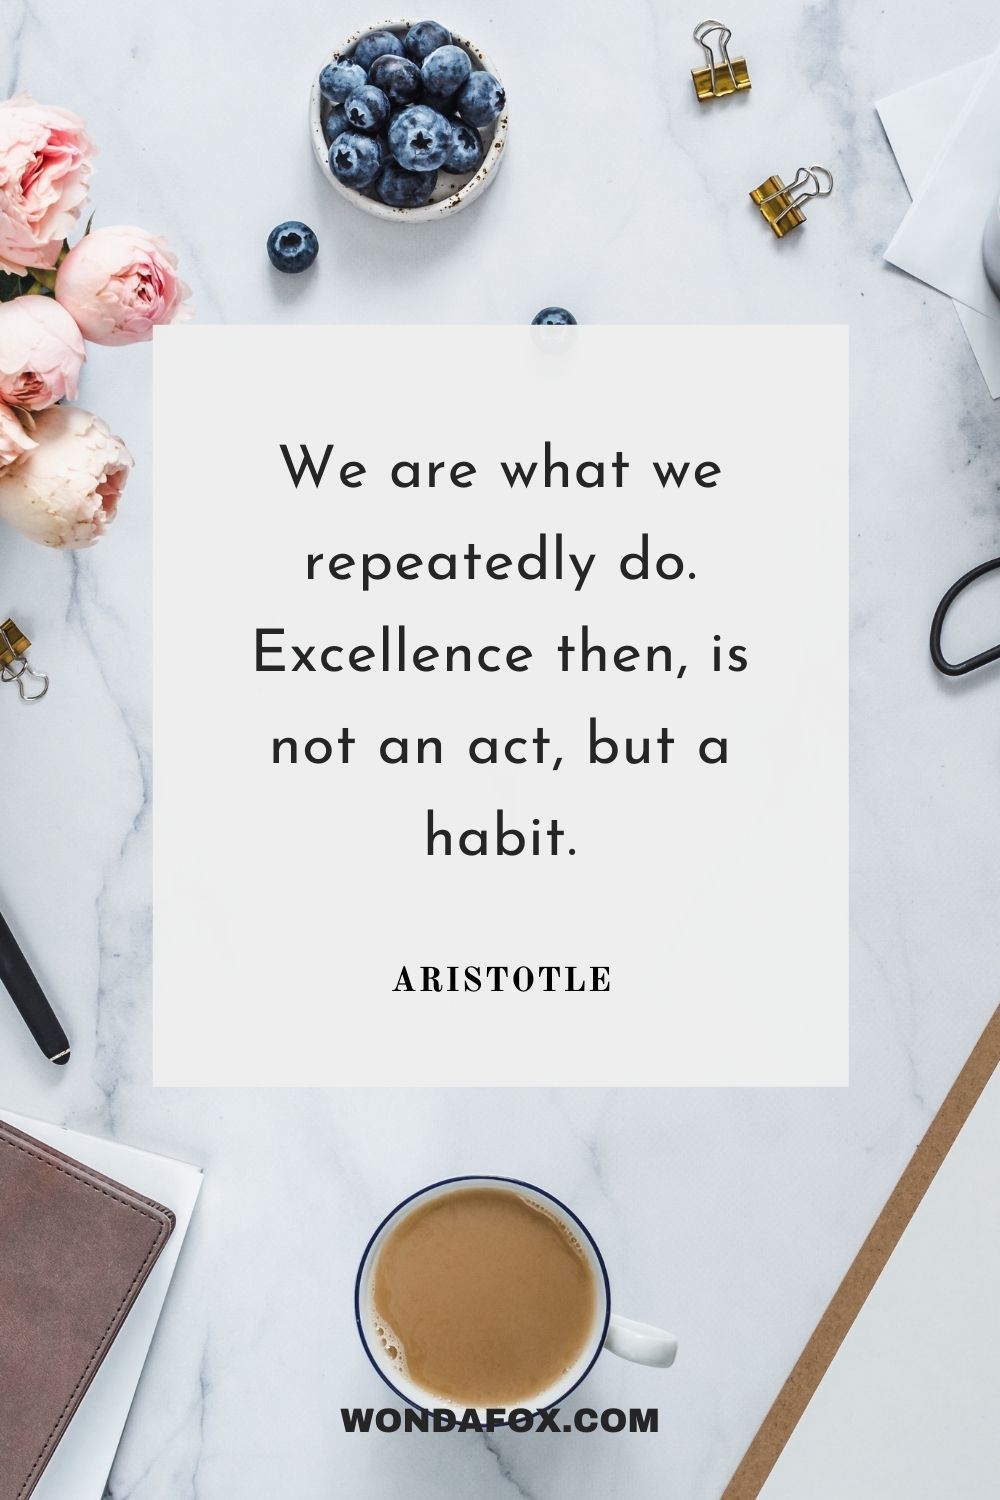 We are what we repeatedly do. Excellence then, is not an act, but a habit.